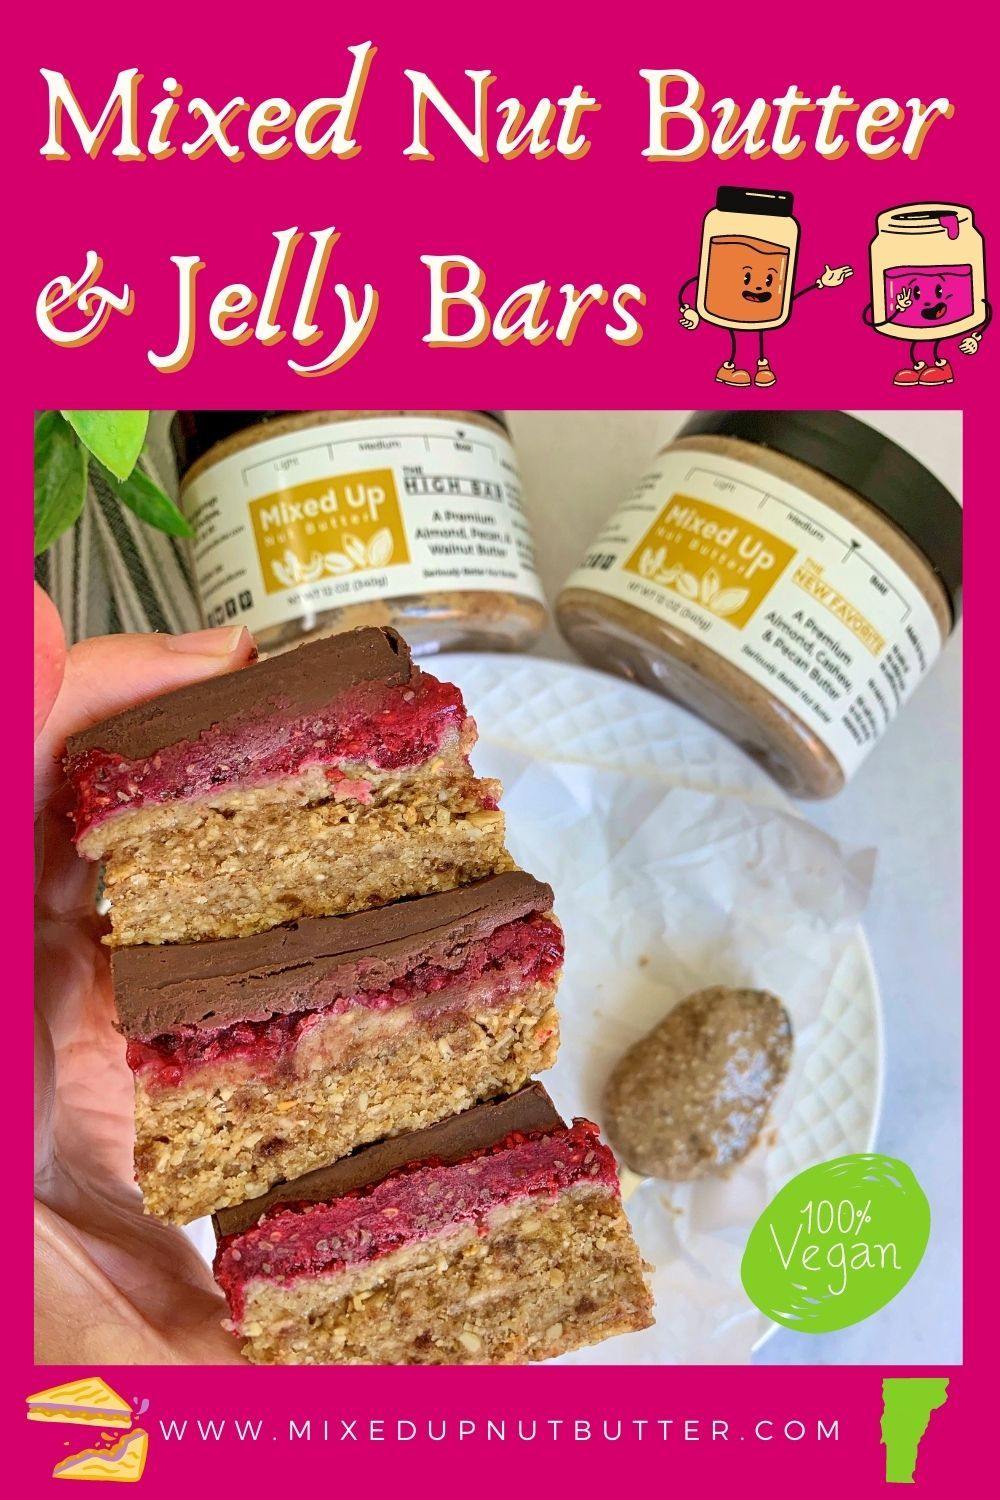 Mixed Nut Butter & Jelly Bars - Mixed Up Nut Butter